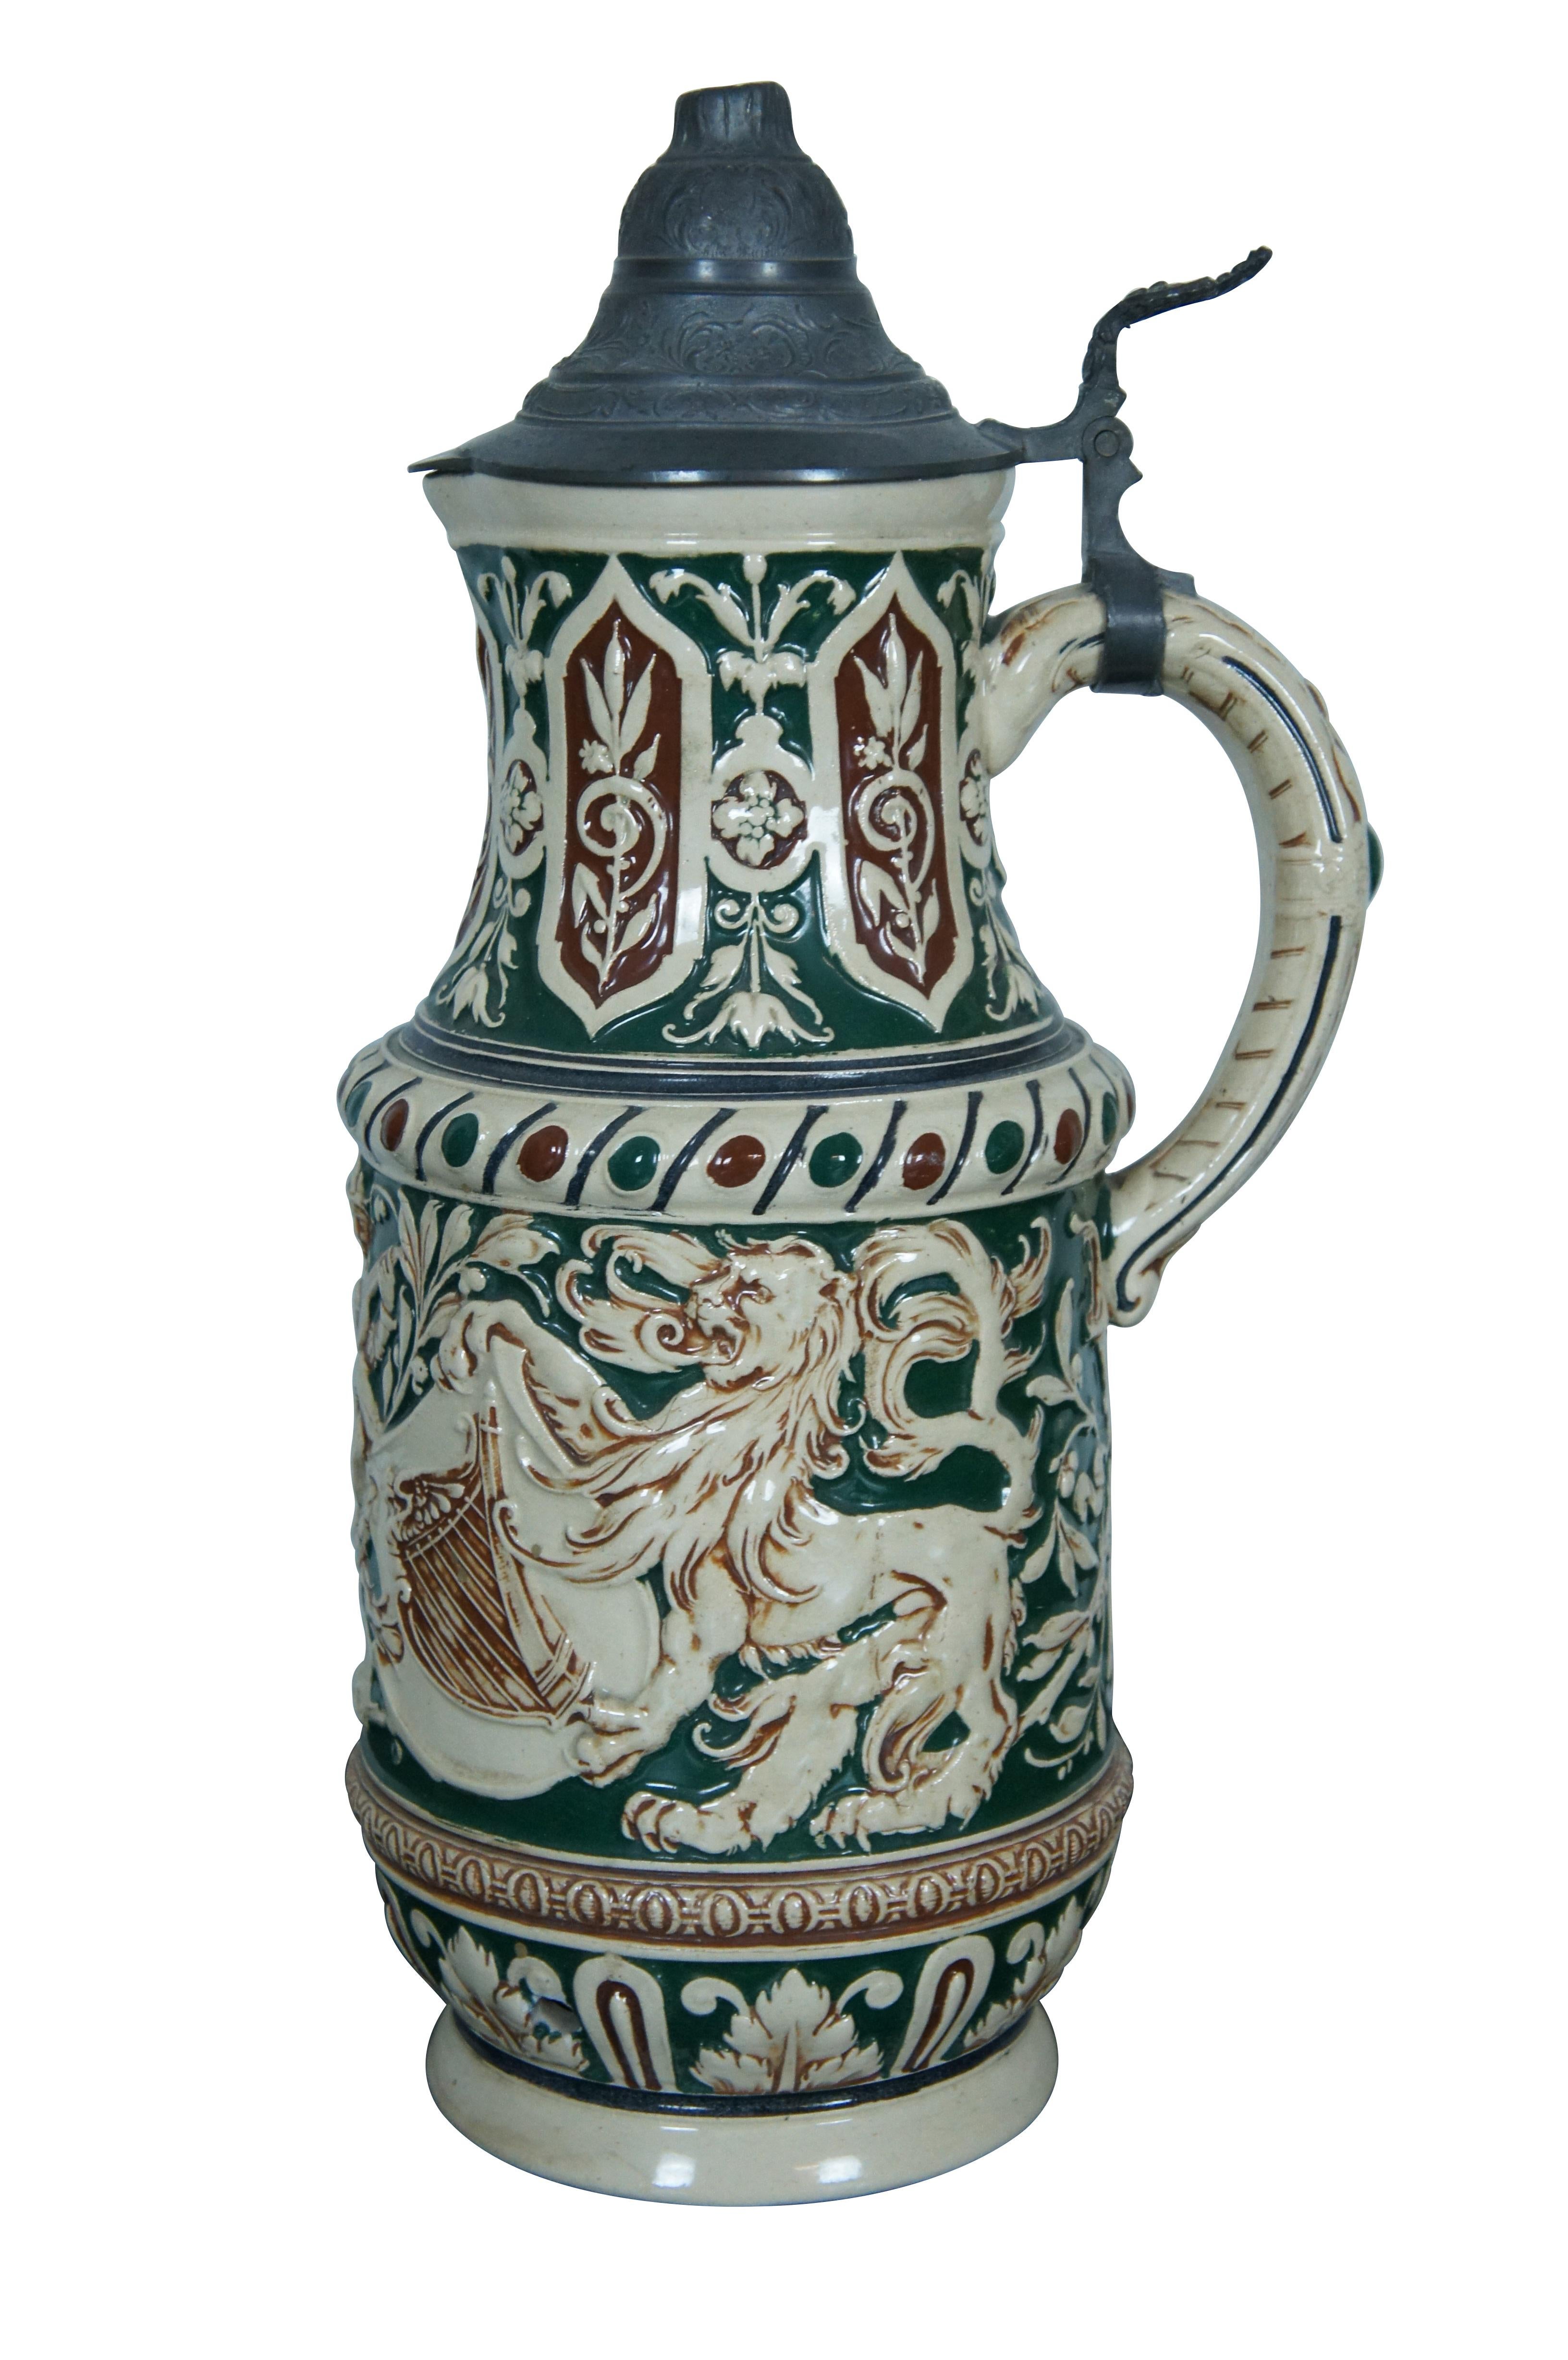 A beautiful old German stoneware stein. Features a red and green motif with Lions holding crests between a man with a Mandolin.  The text on the stein translates to Cheers! Drink according to the old German way.  Jude friends, happy circles.  The